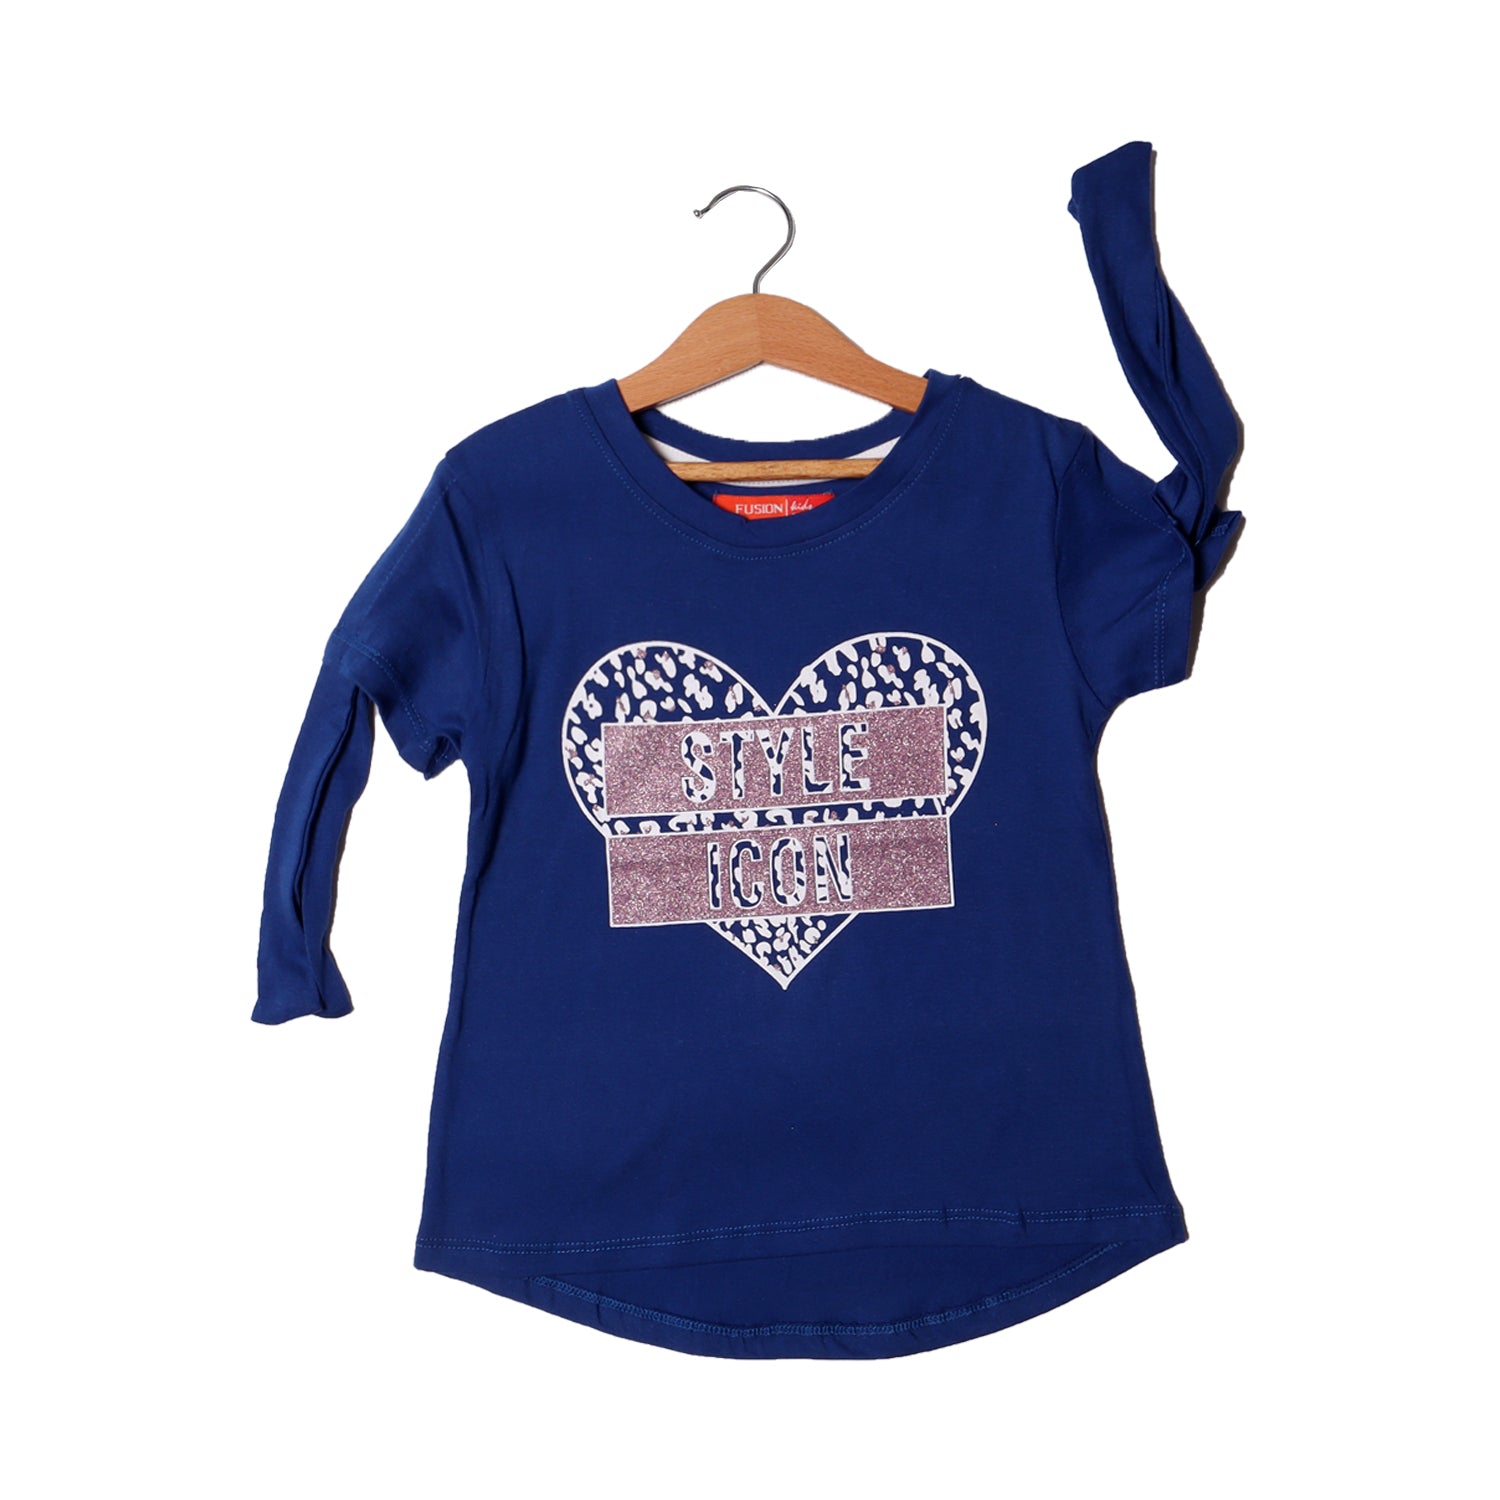 ROYAL BLUE HEART STYLE ICON PRINTED T-SHIRT FOR GIRLS